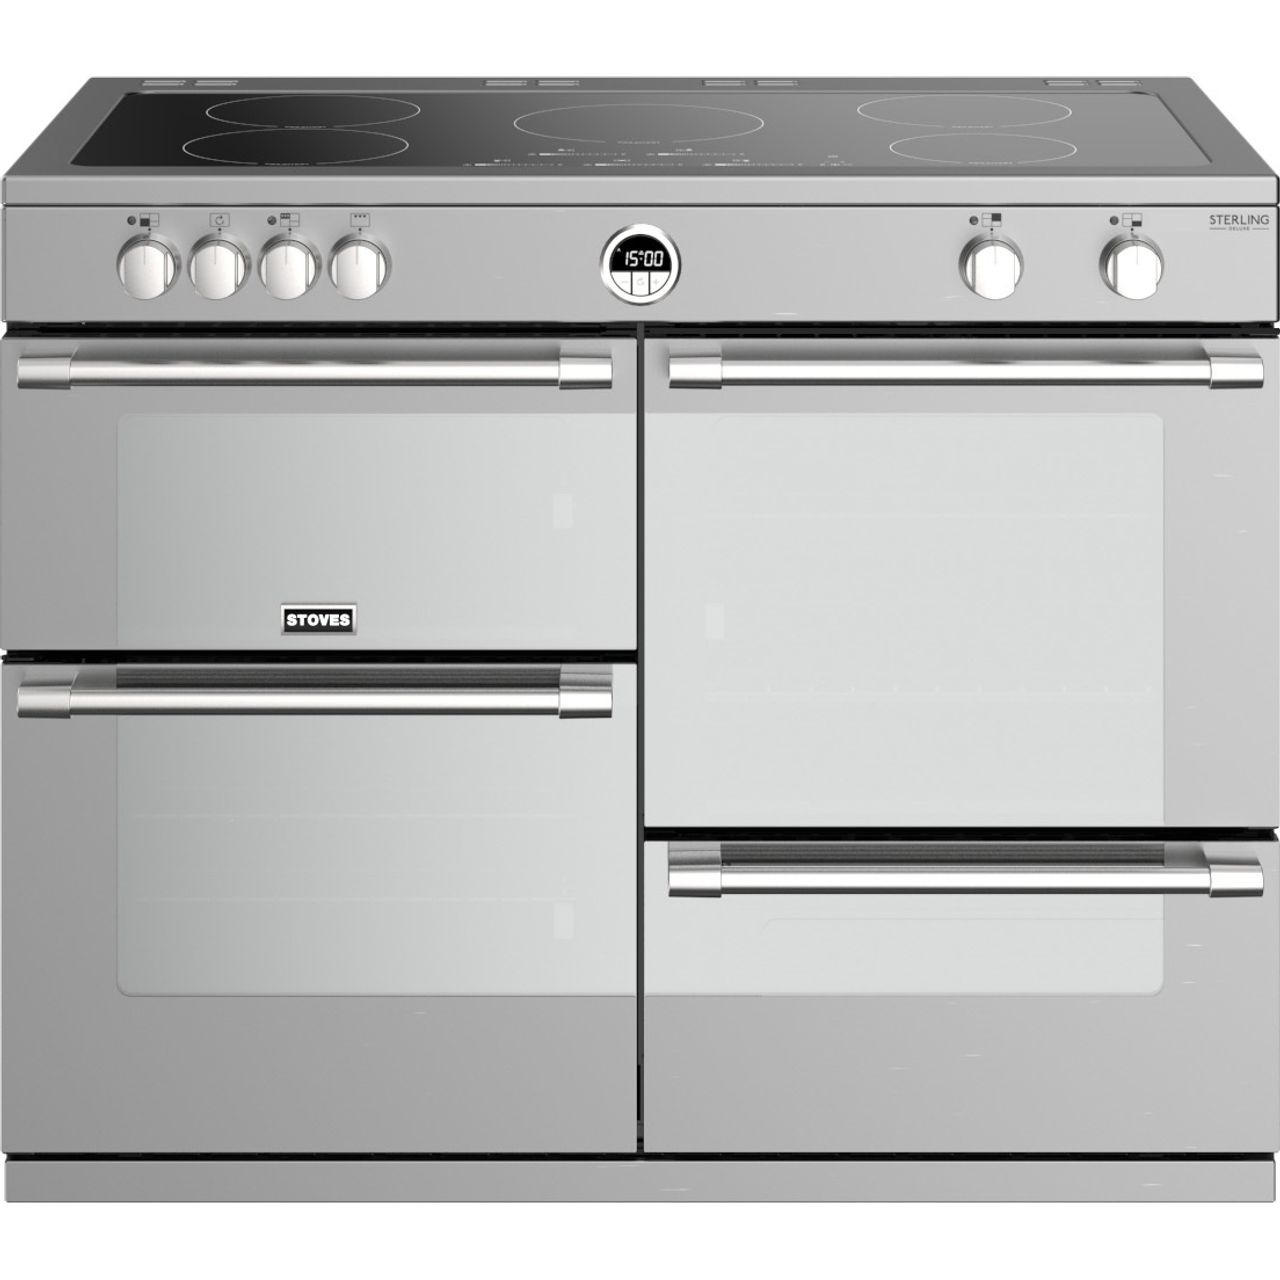 Stoves Sterling Deluxe S1100EI 110cm Electric Range Cooker with Induction Hob Review